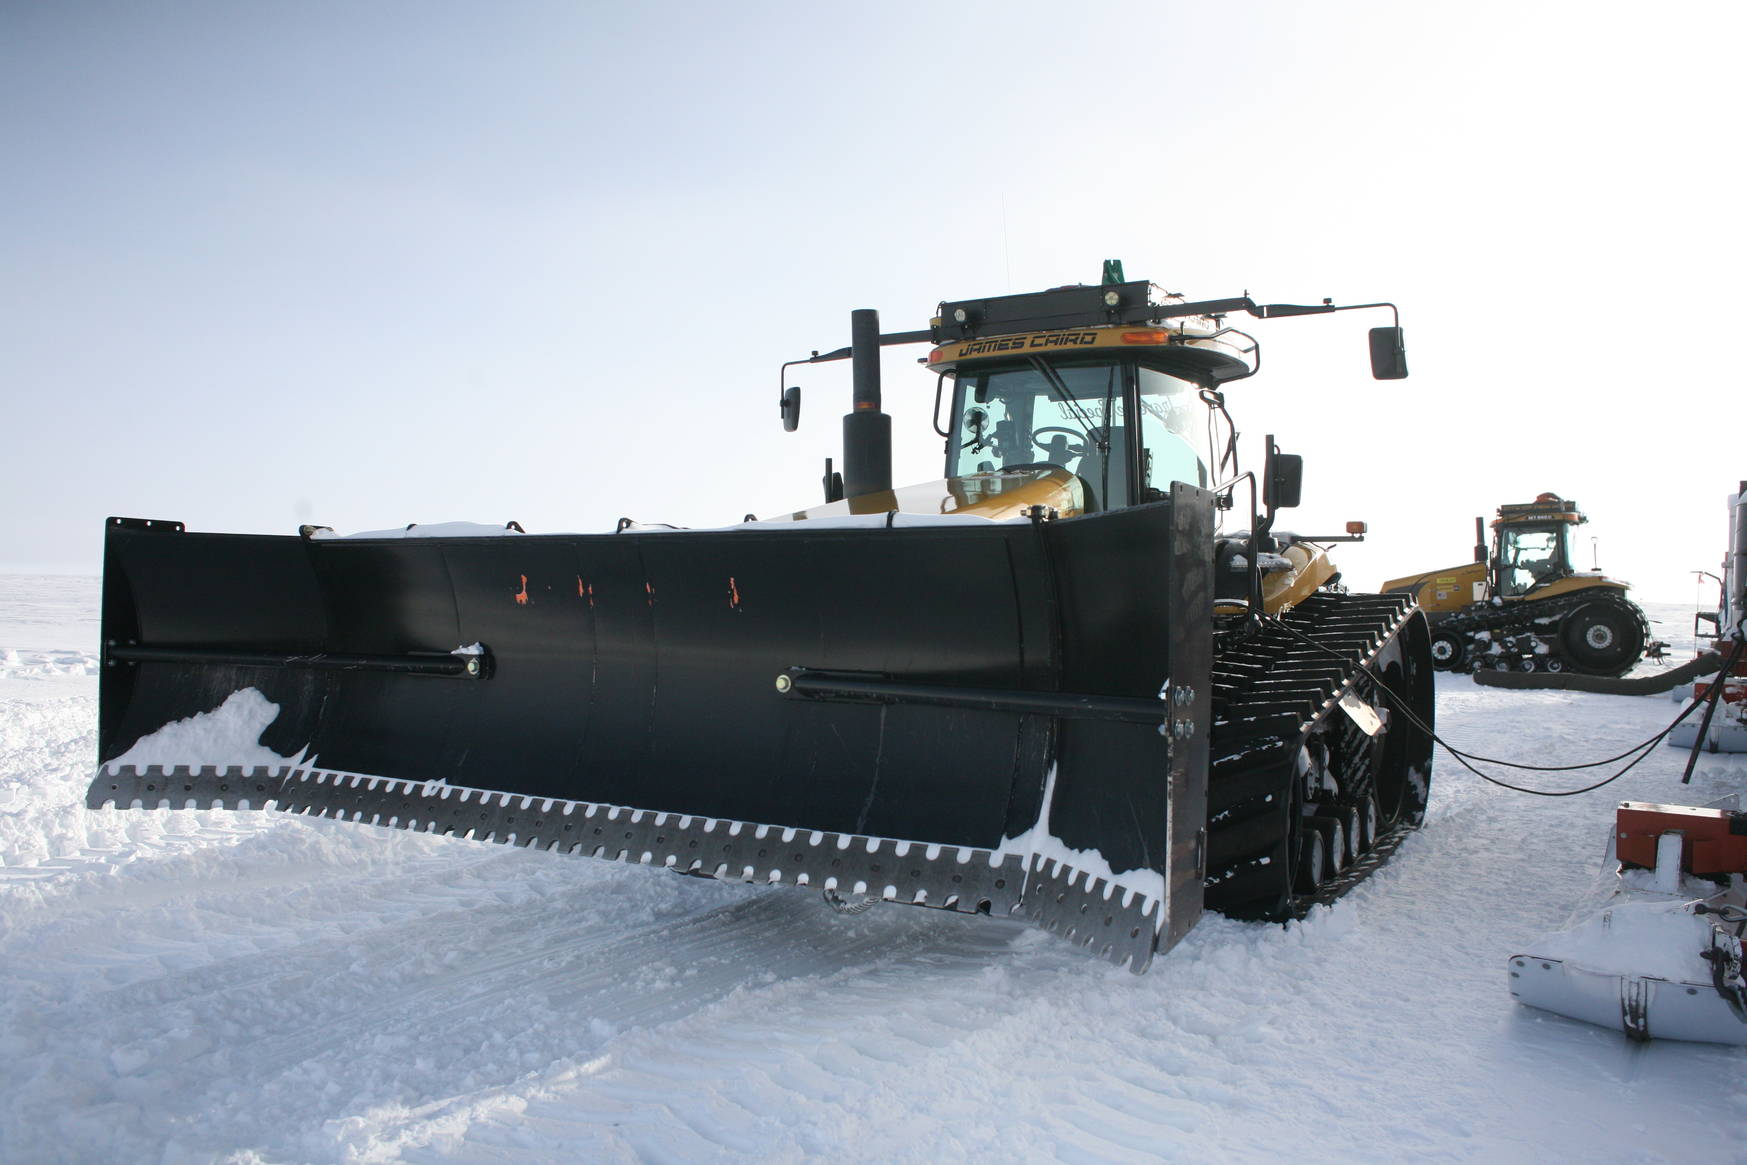 Huge tractors indeed. Here you see one that is equipped with a blade to clear the path of snow drifts.